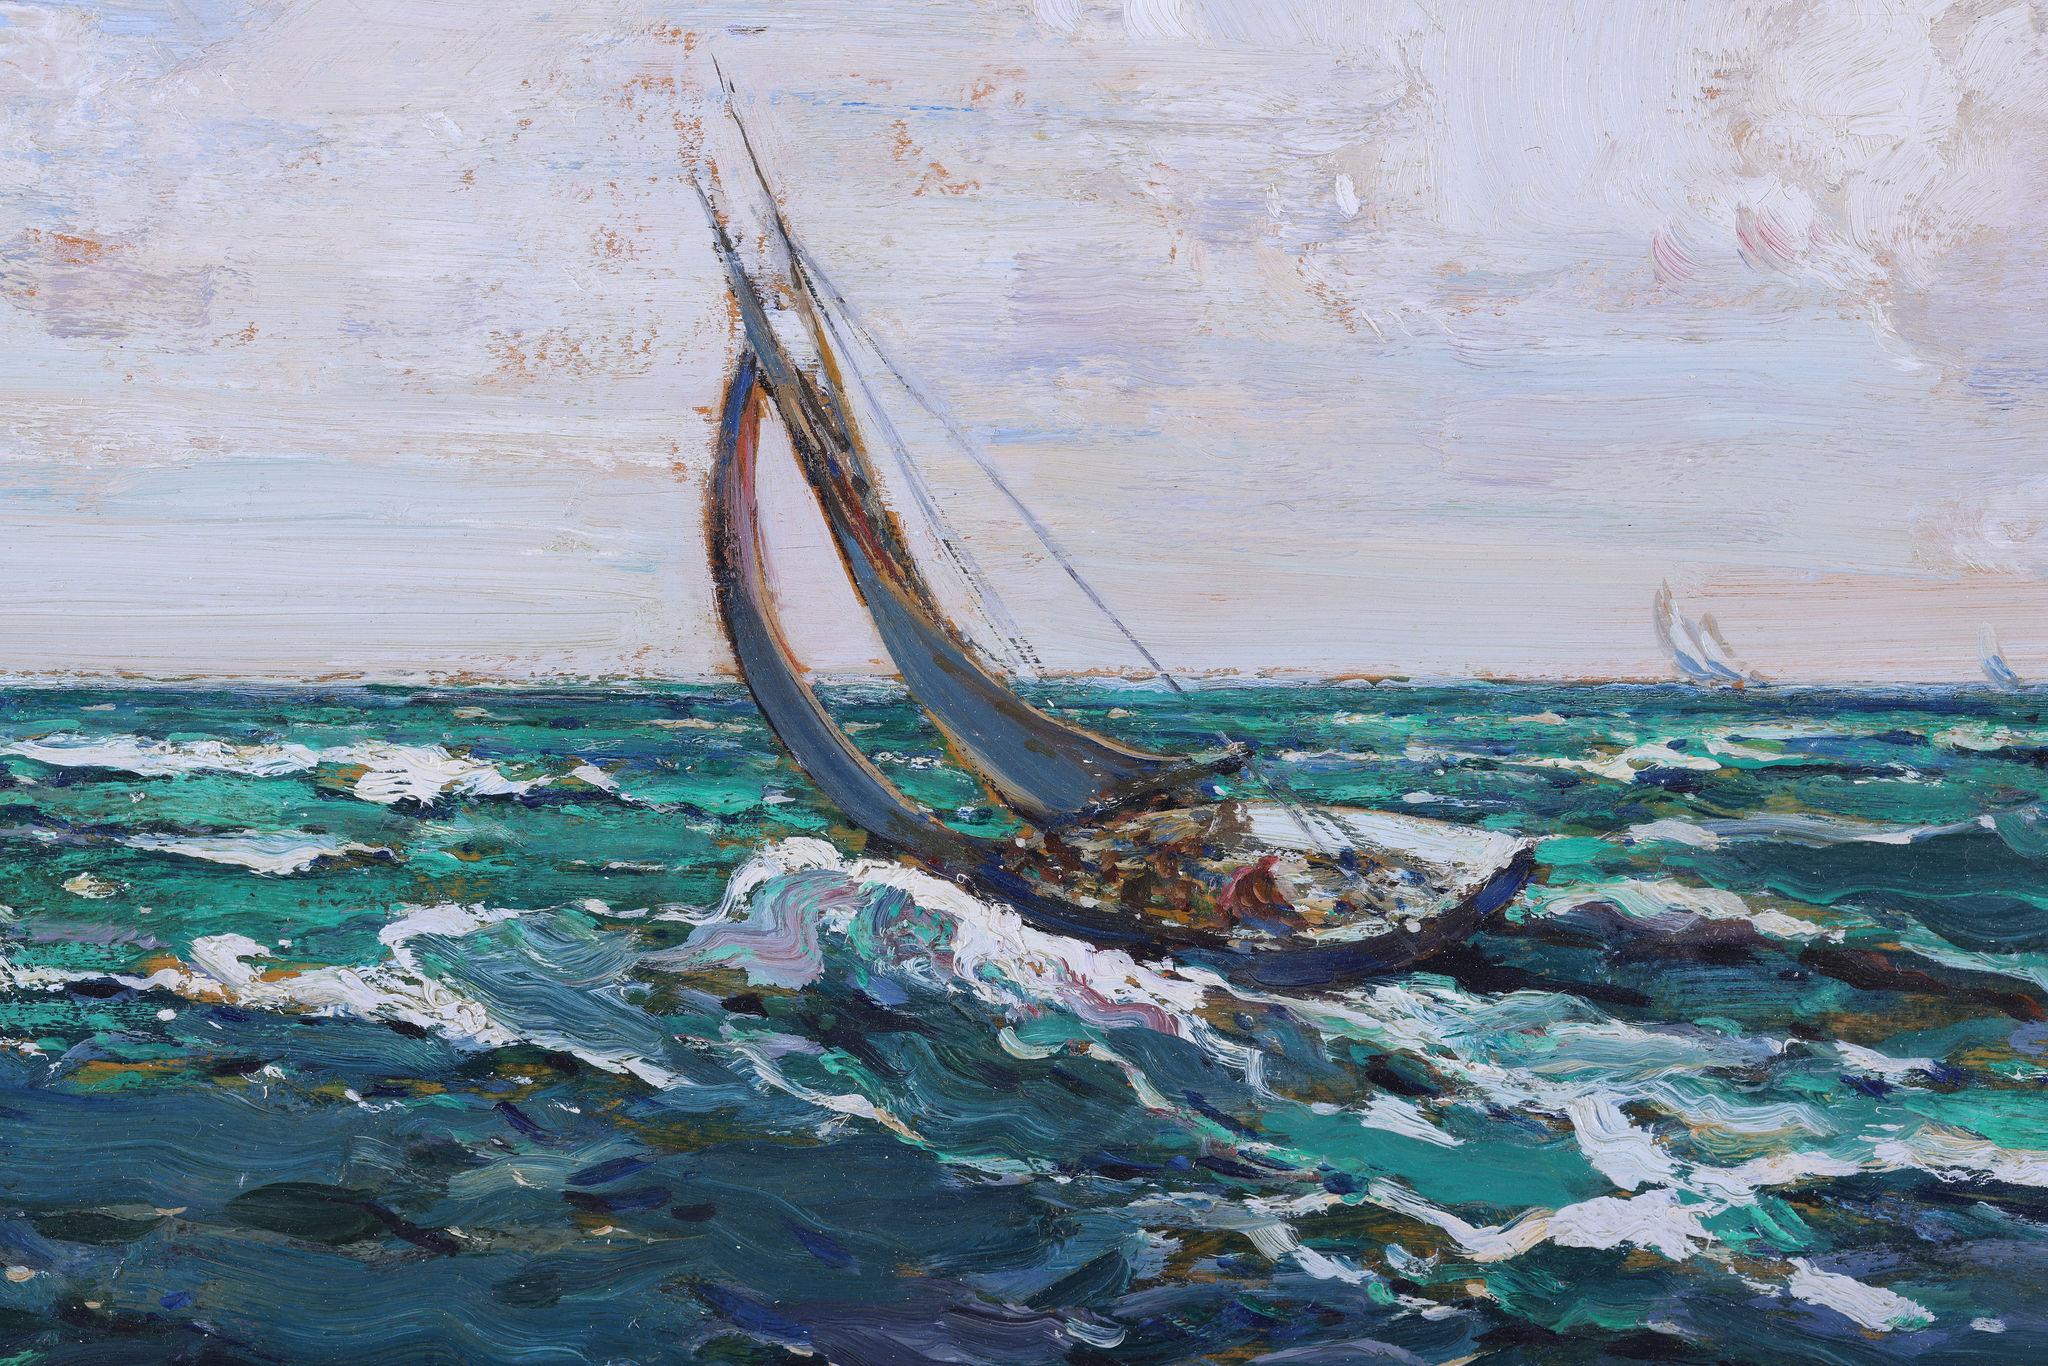 Full Sail . A Boat at Sea - English School Painting by Kershaw Schofield